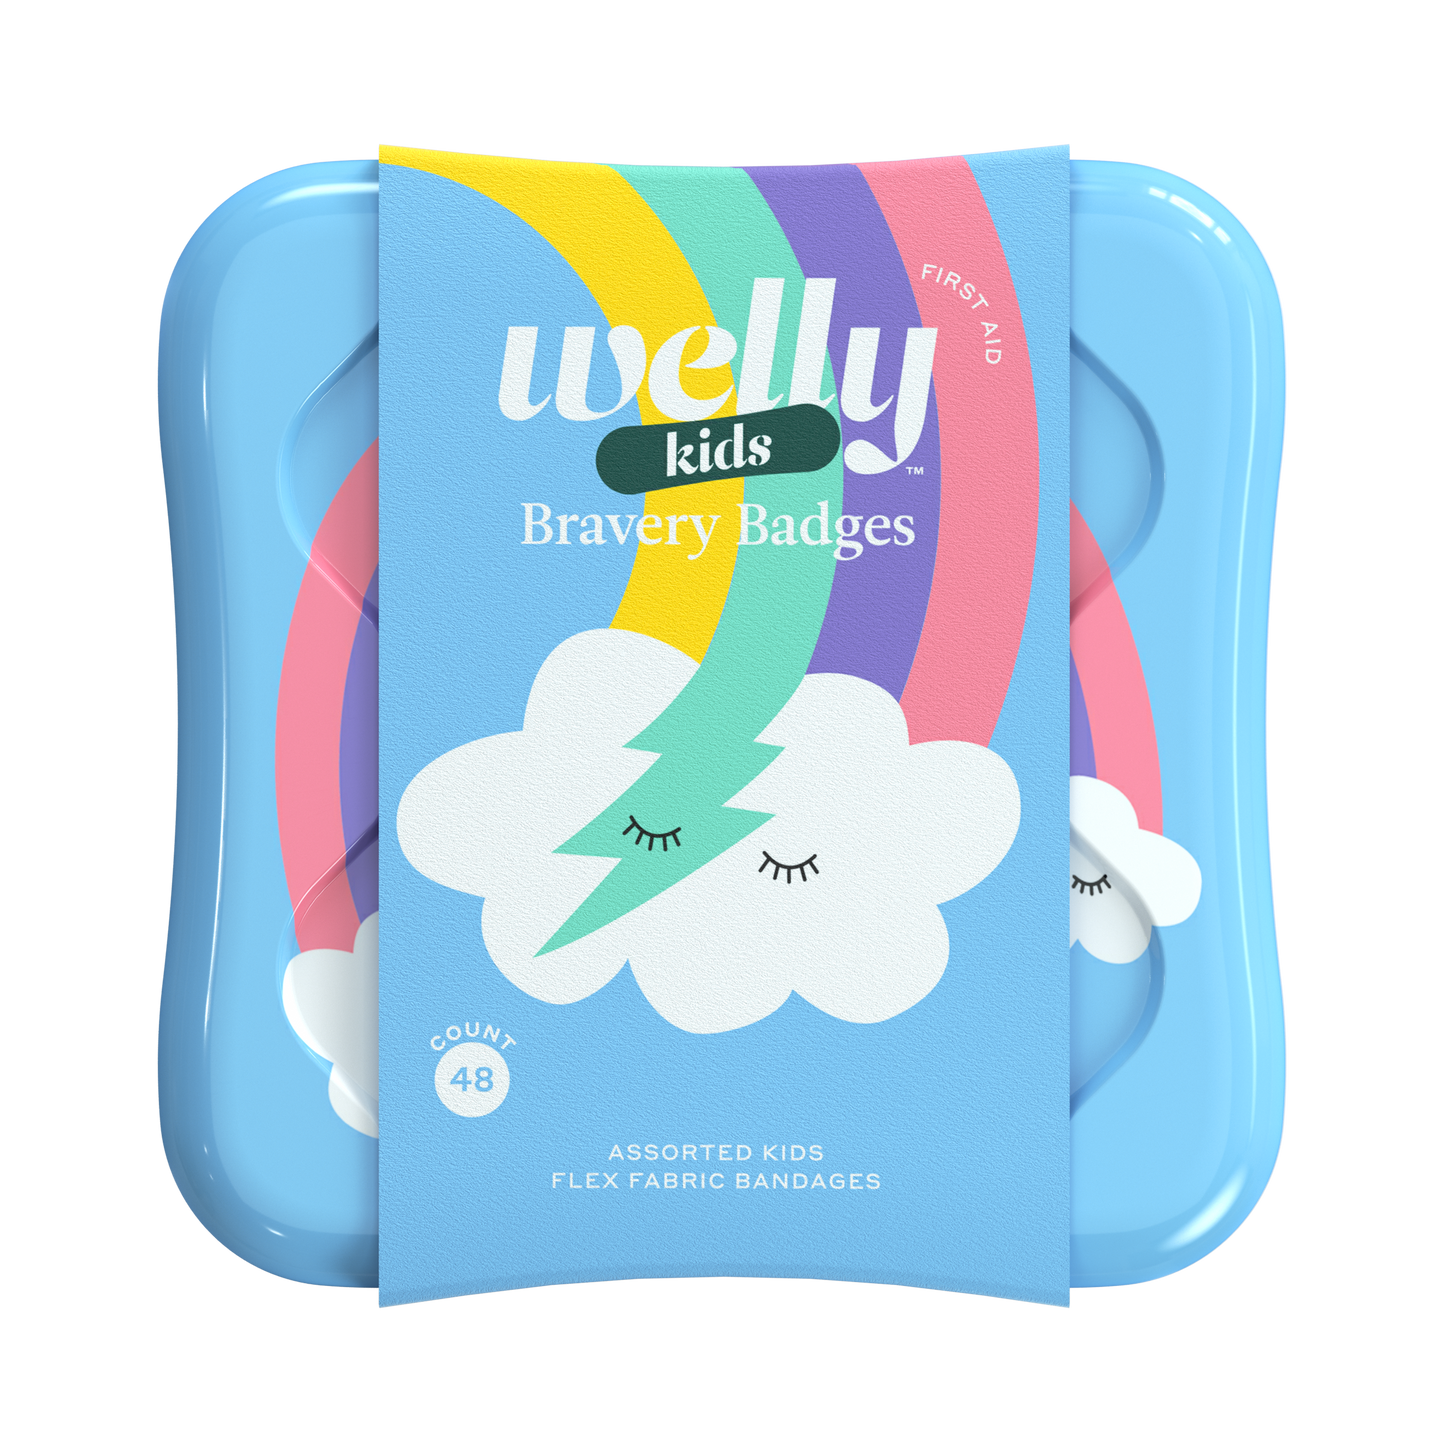 Kids Rainbow Bravery Badges bandage 48 pack by Welly